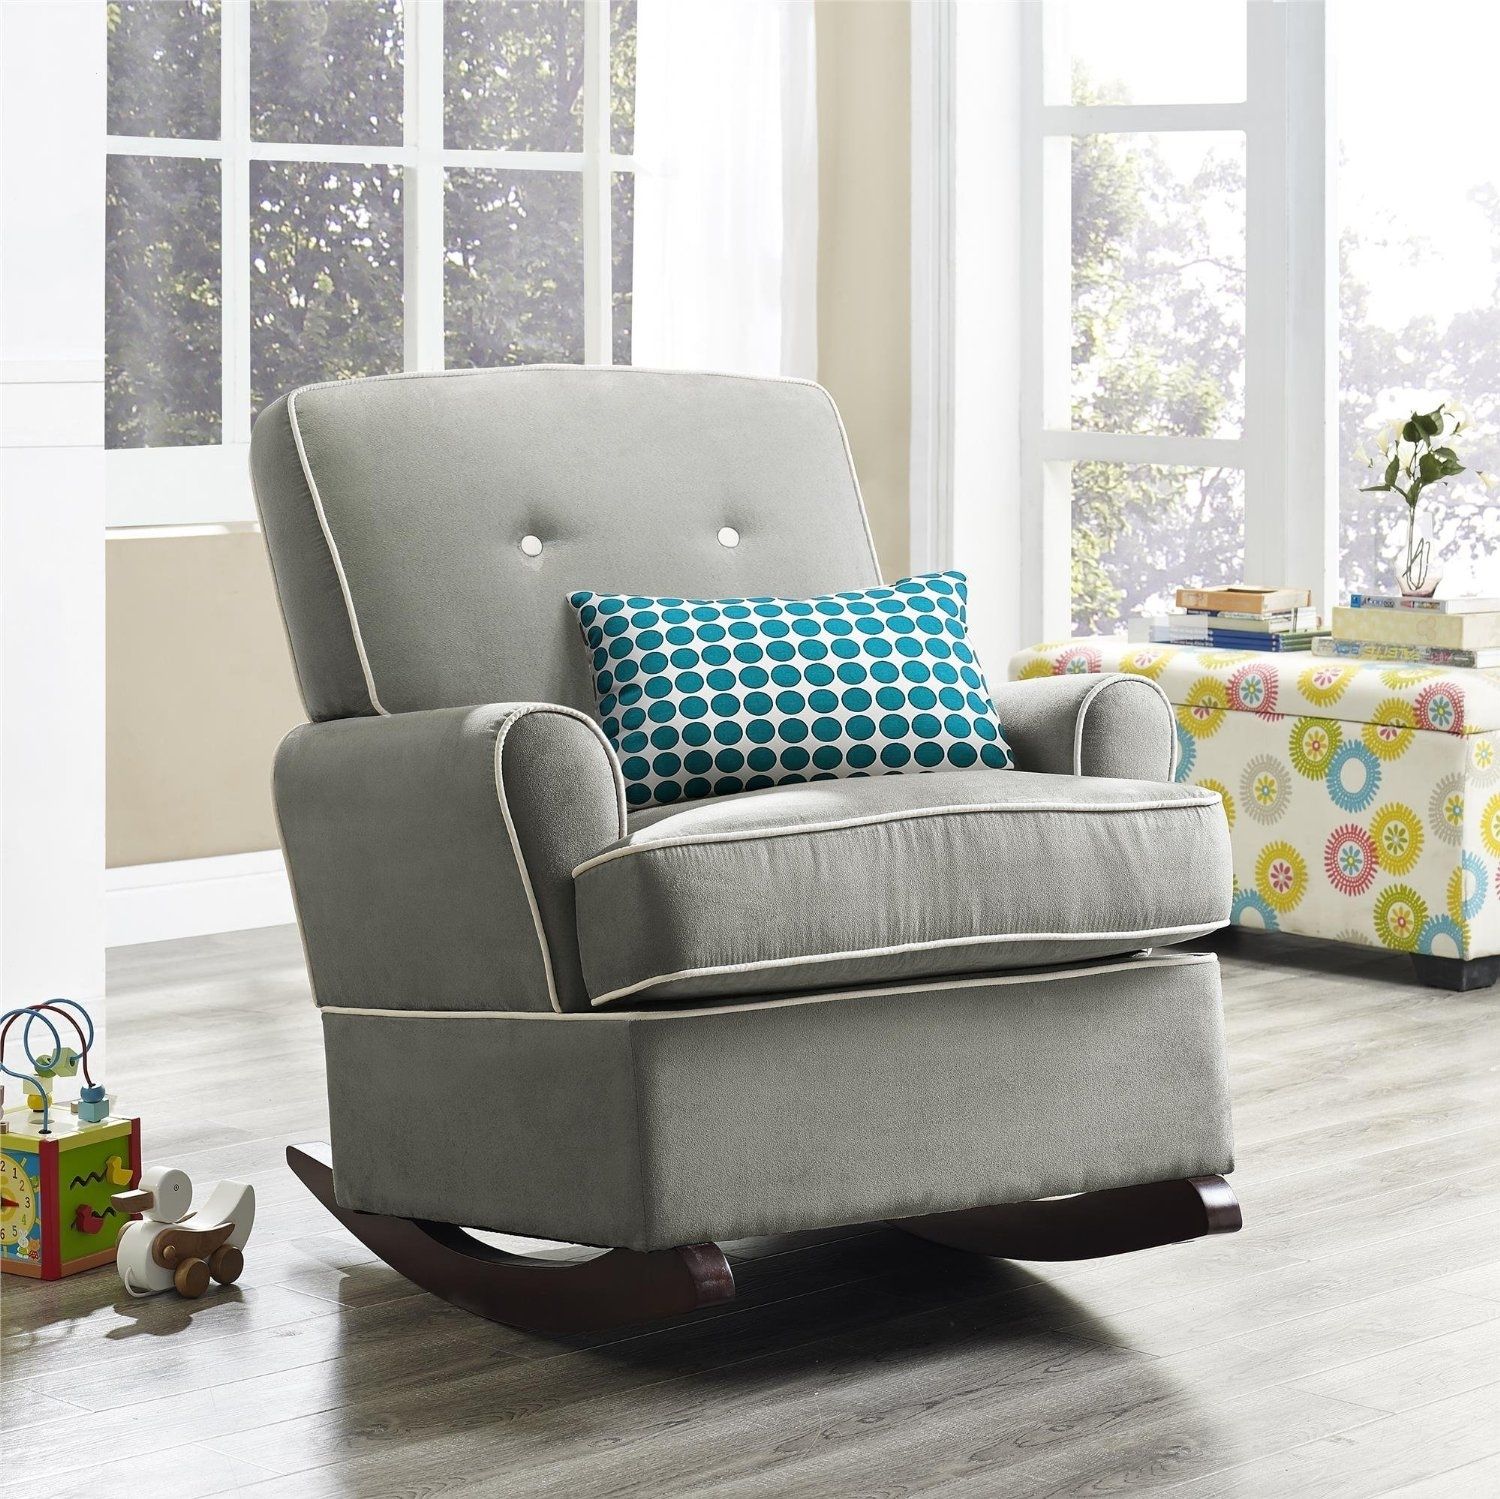 The Best Upholstered Rocking Chair 2018 | Best Rocking Chairs Throughout Upholstered Rocking Chairs (View 10 of 15)